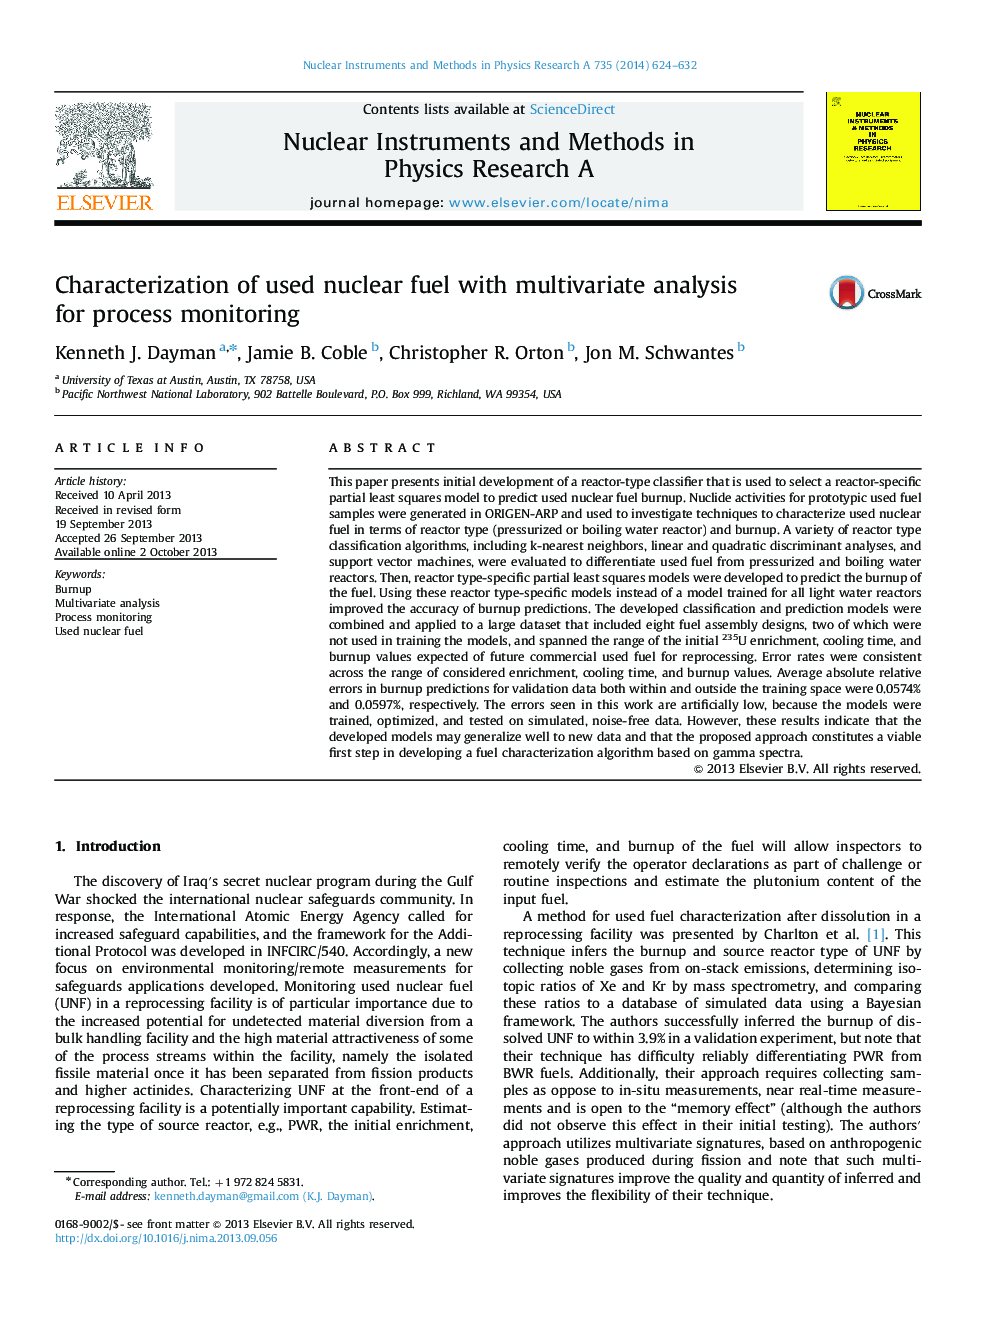 Characterization of used nuclear fuel with multivariate analysis for process monitoring